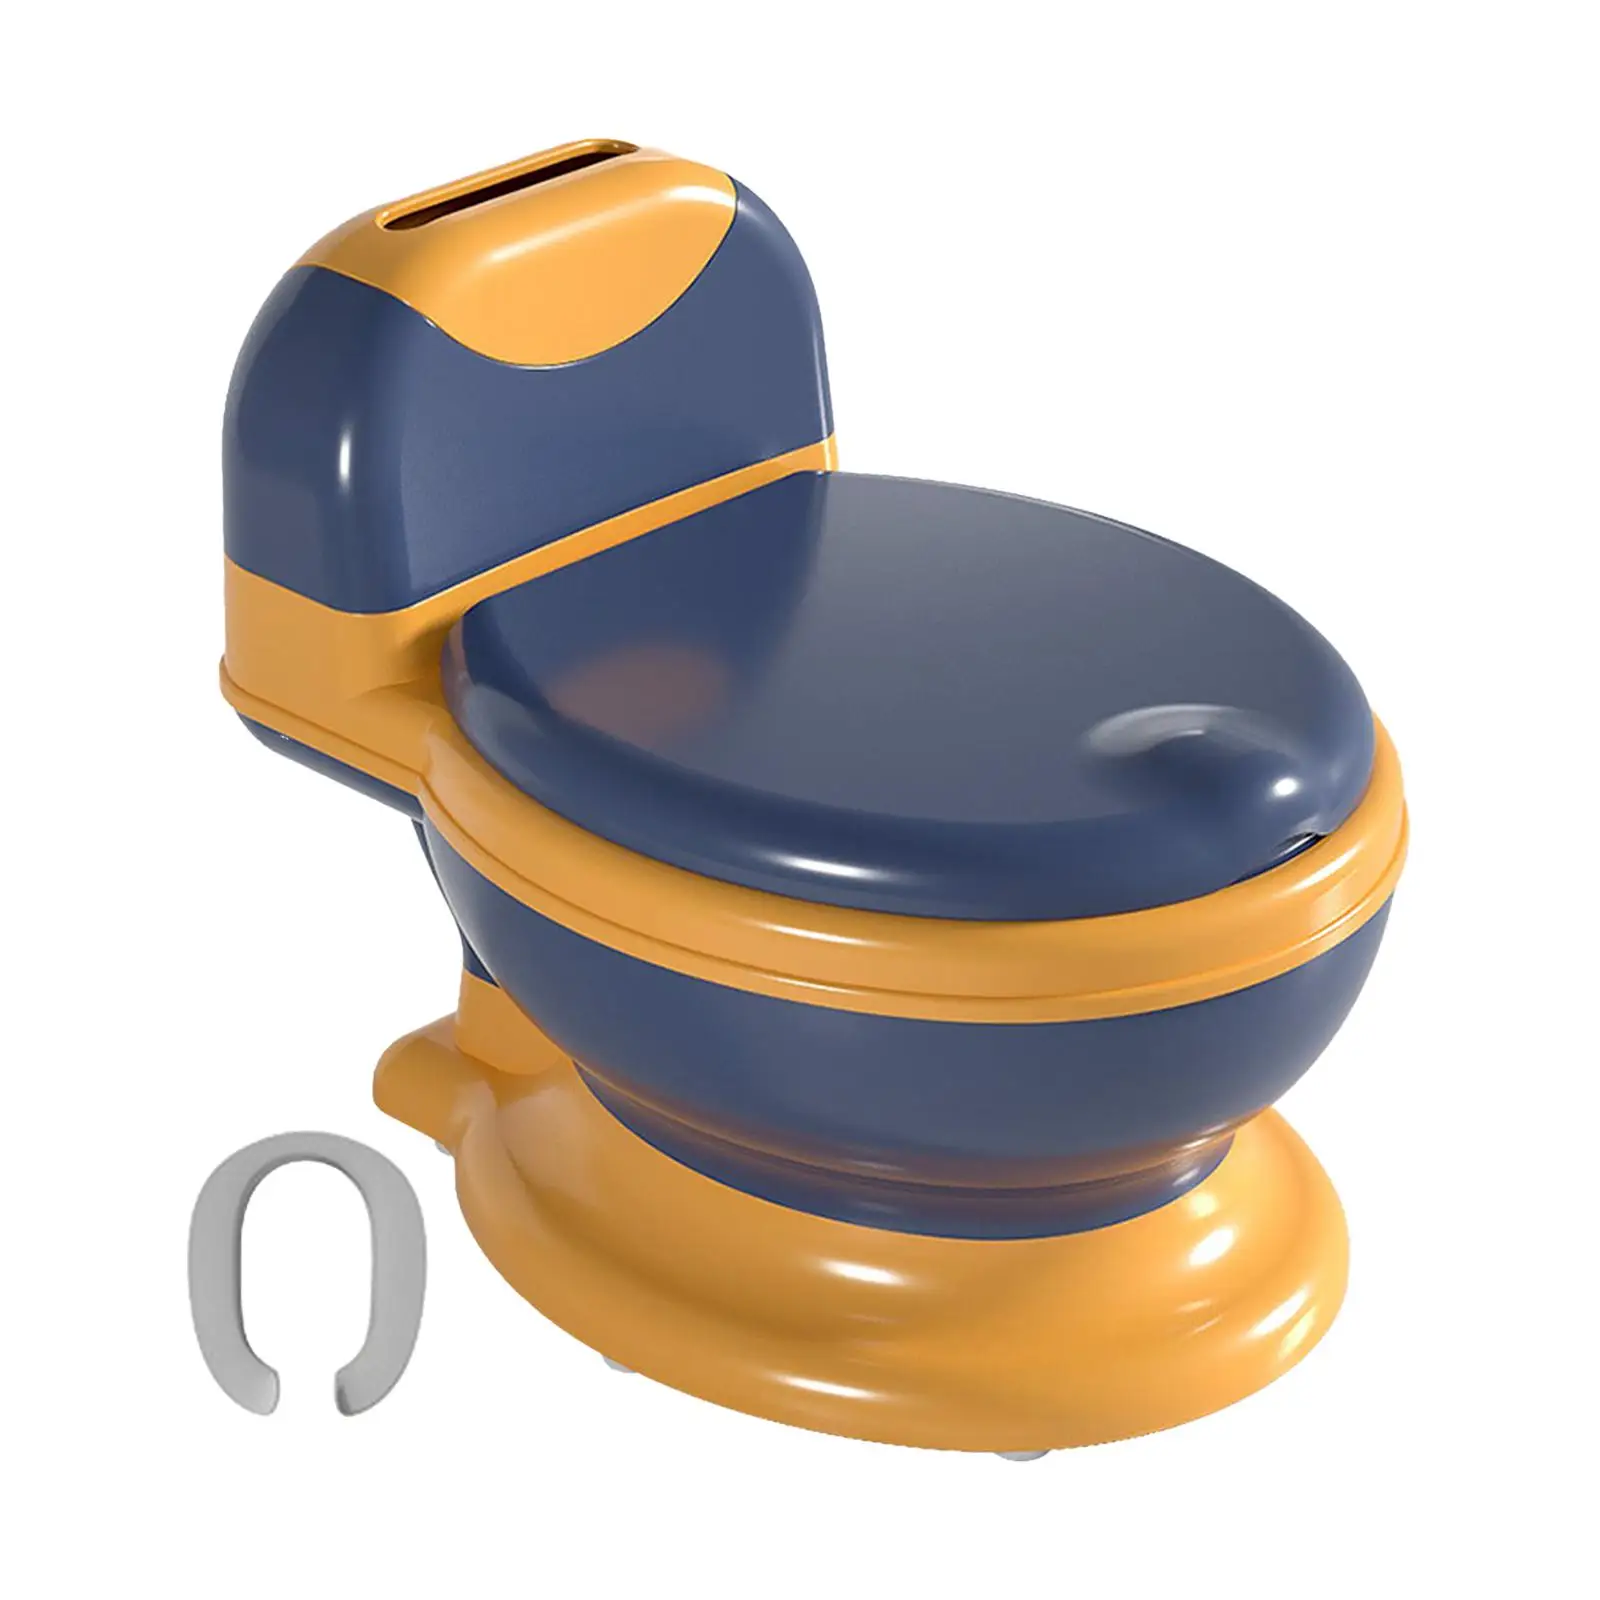 Potty Train Toilet Comfortable Portable Detachable Realistic Toilet Real Feel Potty for Boys Girls Kids Children Toddlers